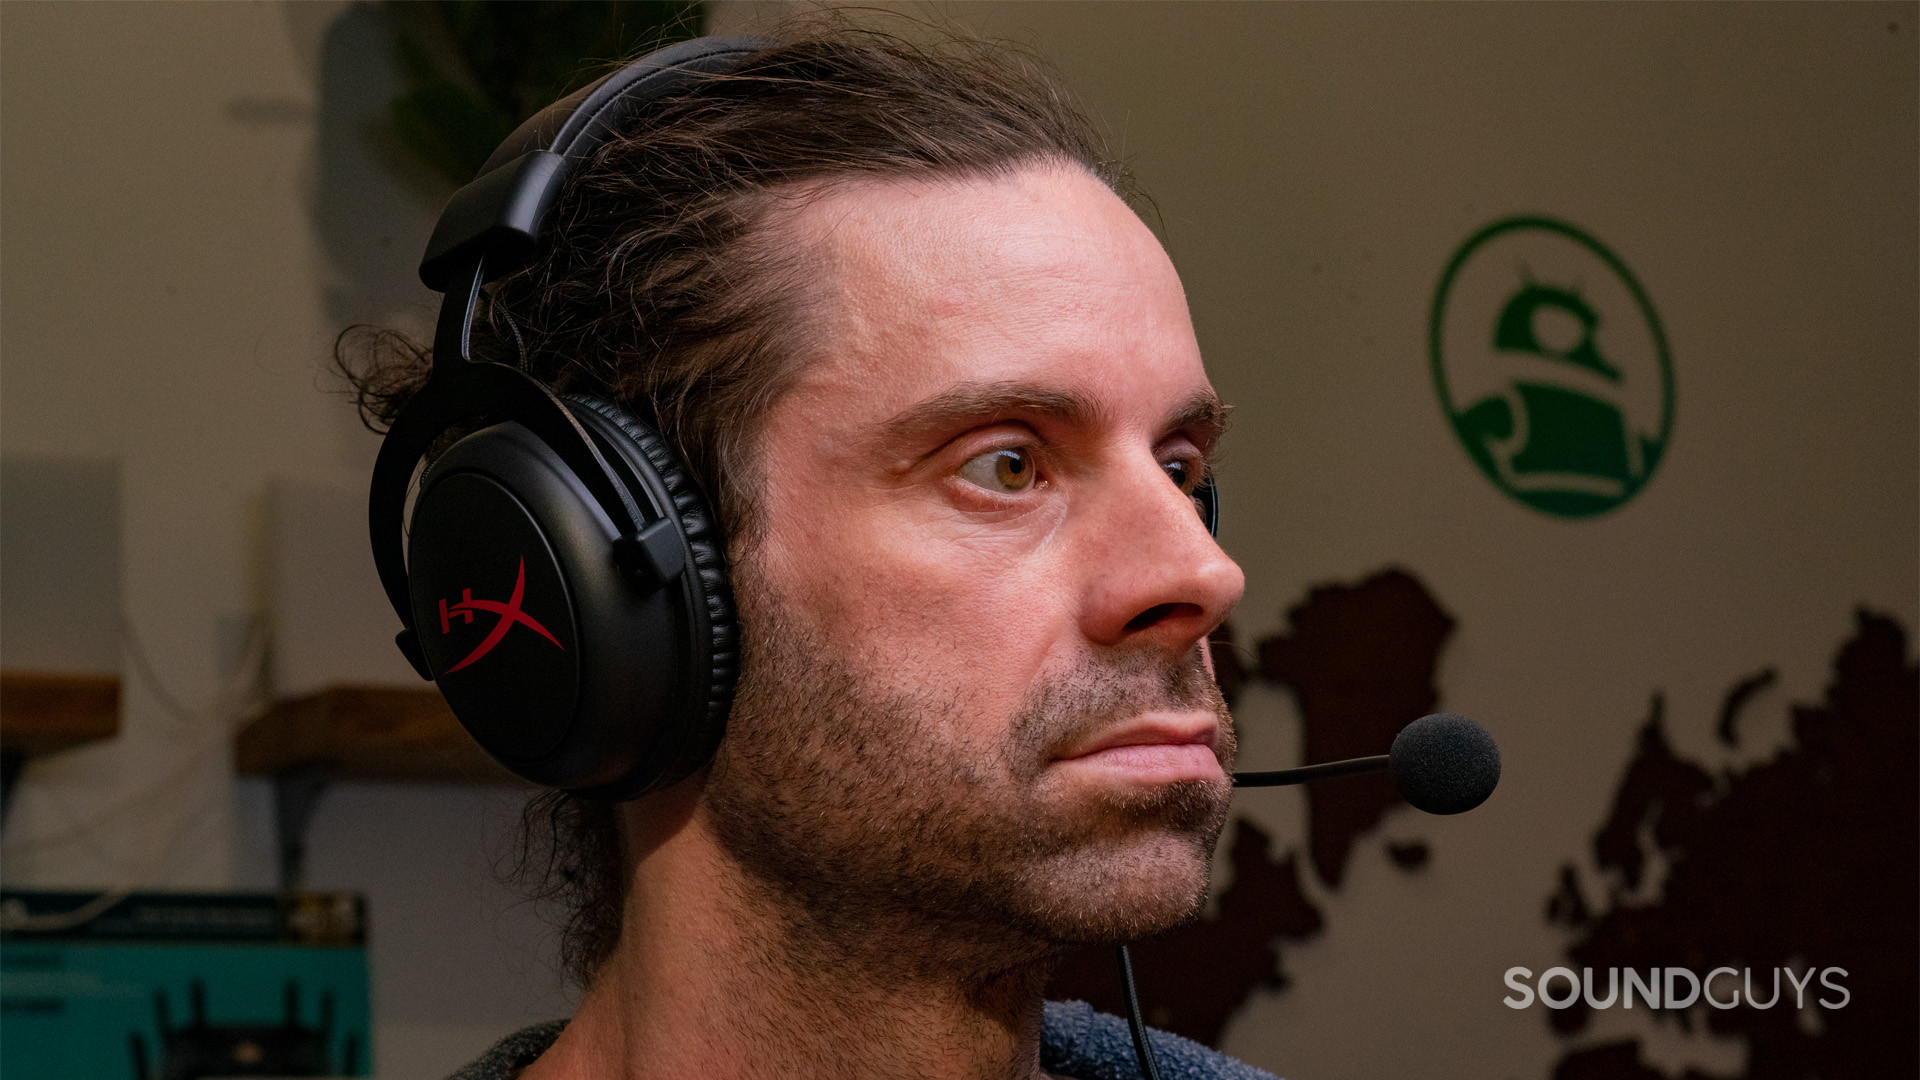 The HyperX Cloud Core being worn by a user.